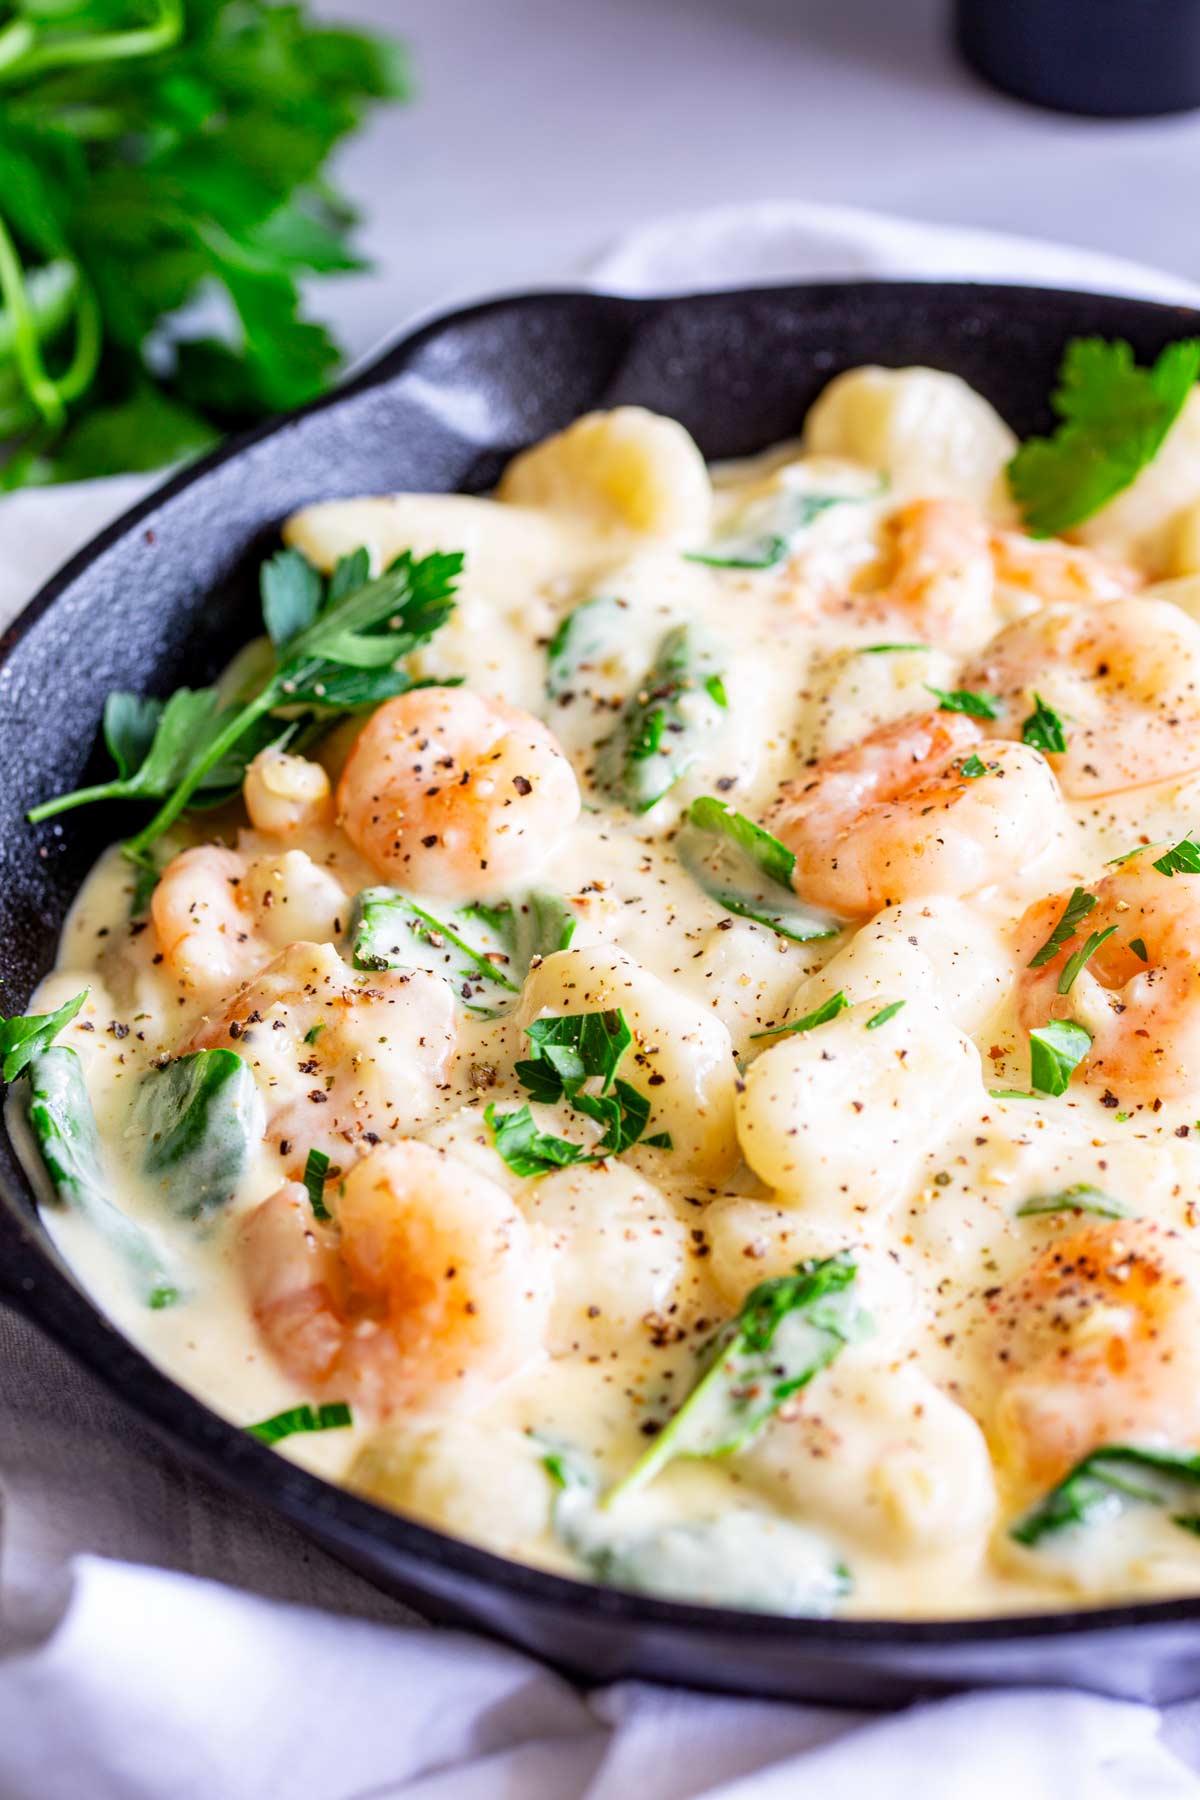 a cast iron skillet filled with gnocchi and shrimp in a creamy white sauce